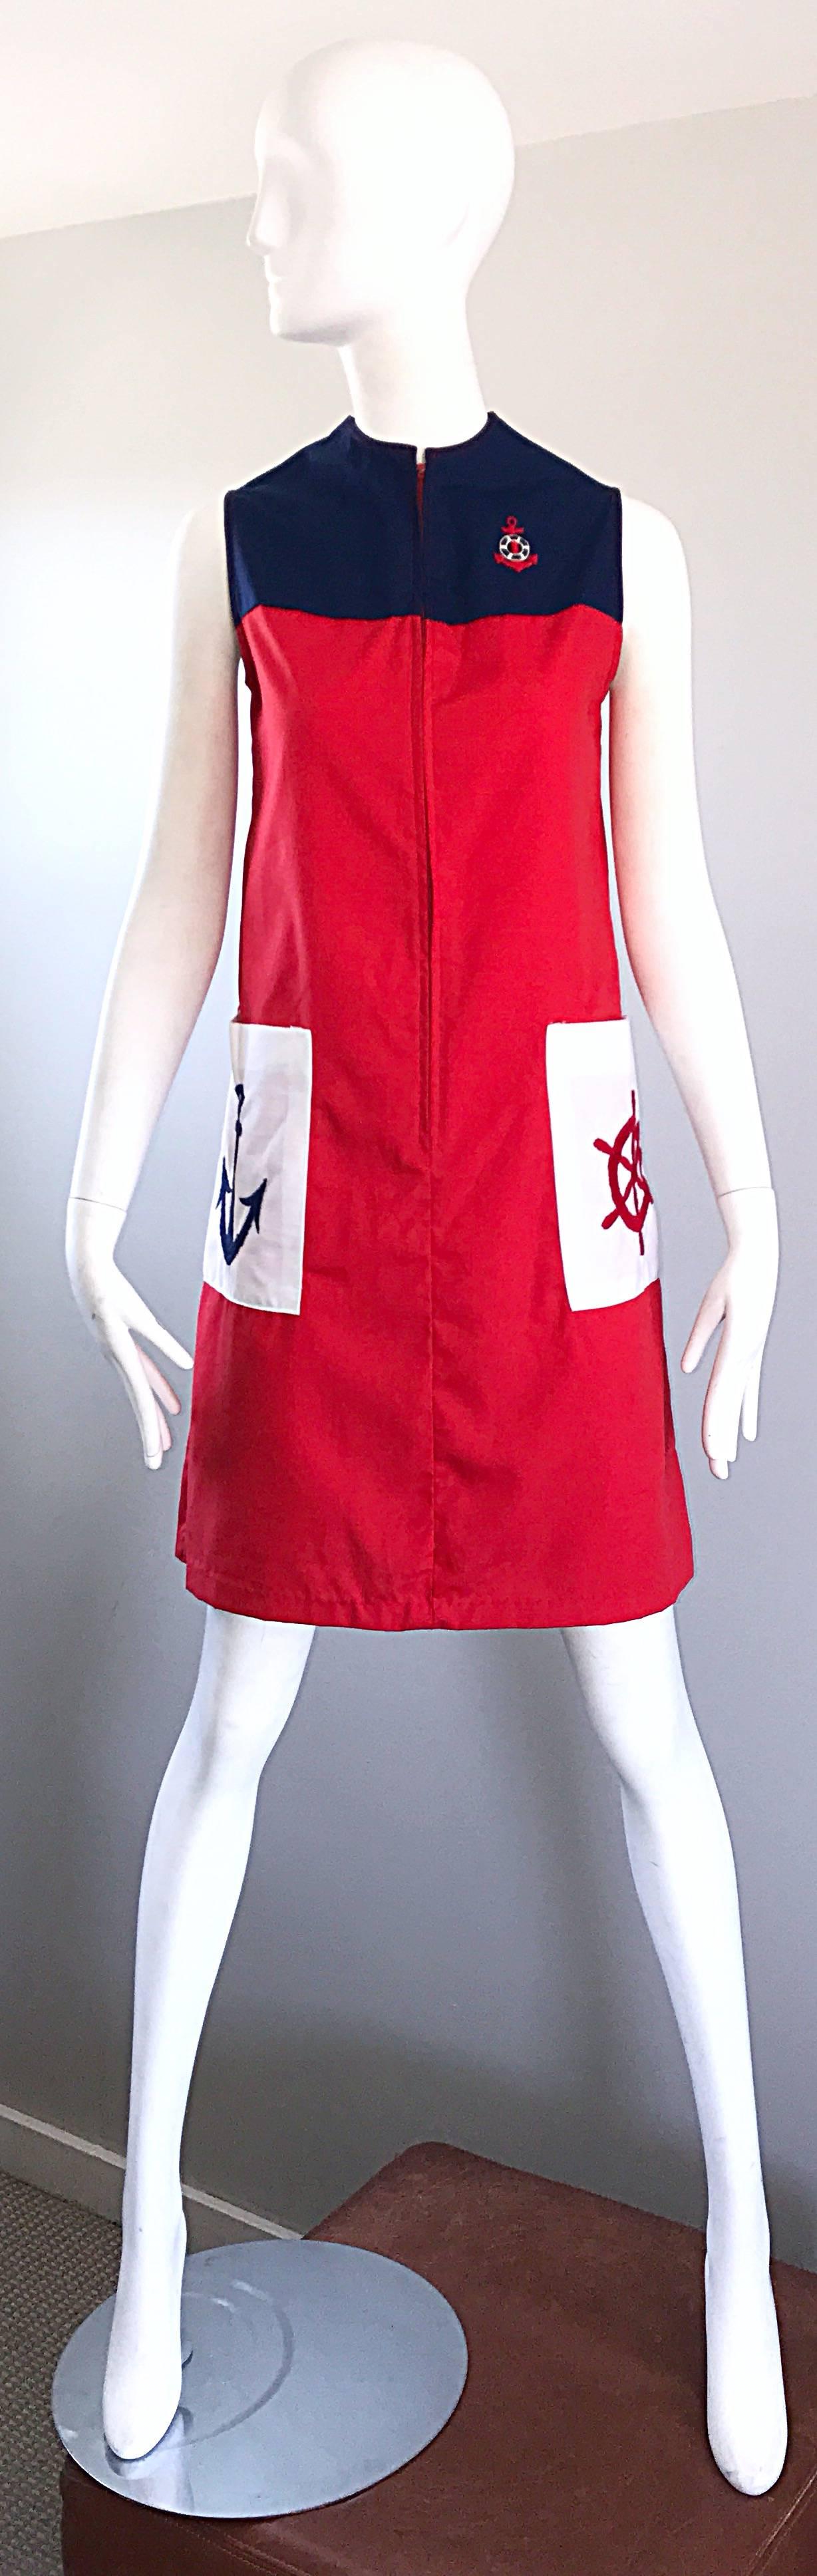 Chic 1960s red, white and blue nautical A-Line cotton blend sailor dress! Features a color block body with embroidery at each hip pocket and on the left breast. Anchor embroidered at right hip pocket, and ship wheel embroidered on left hip pocket.